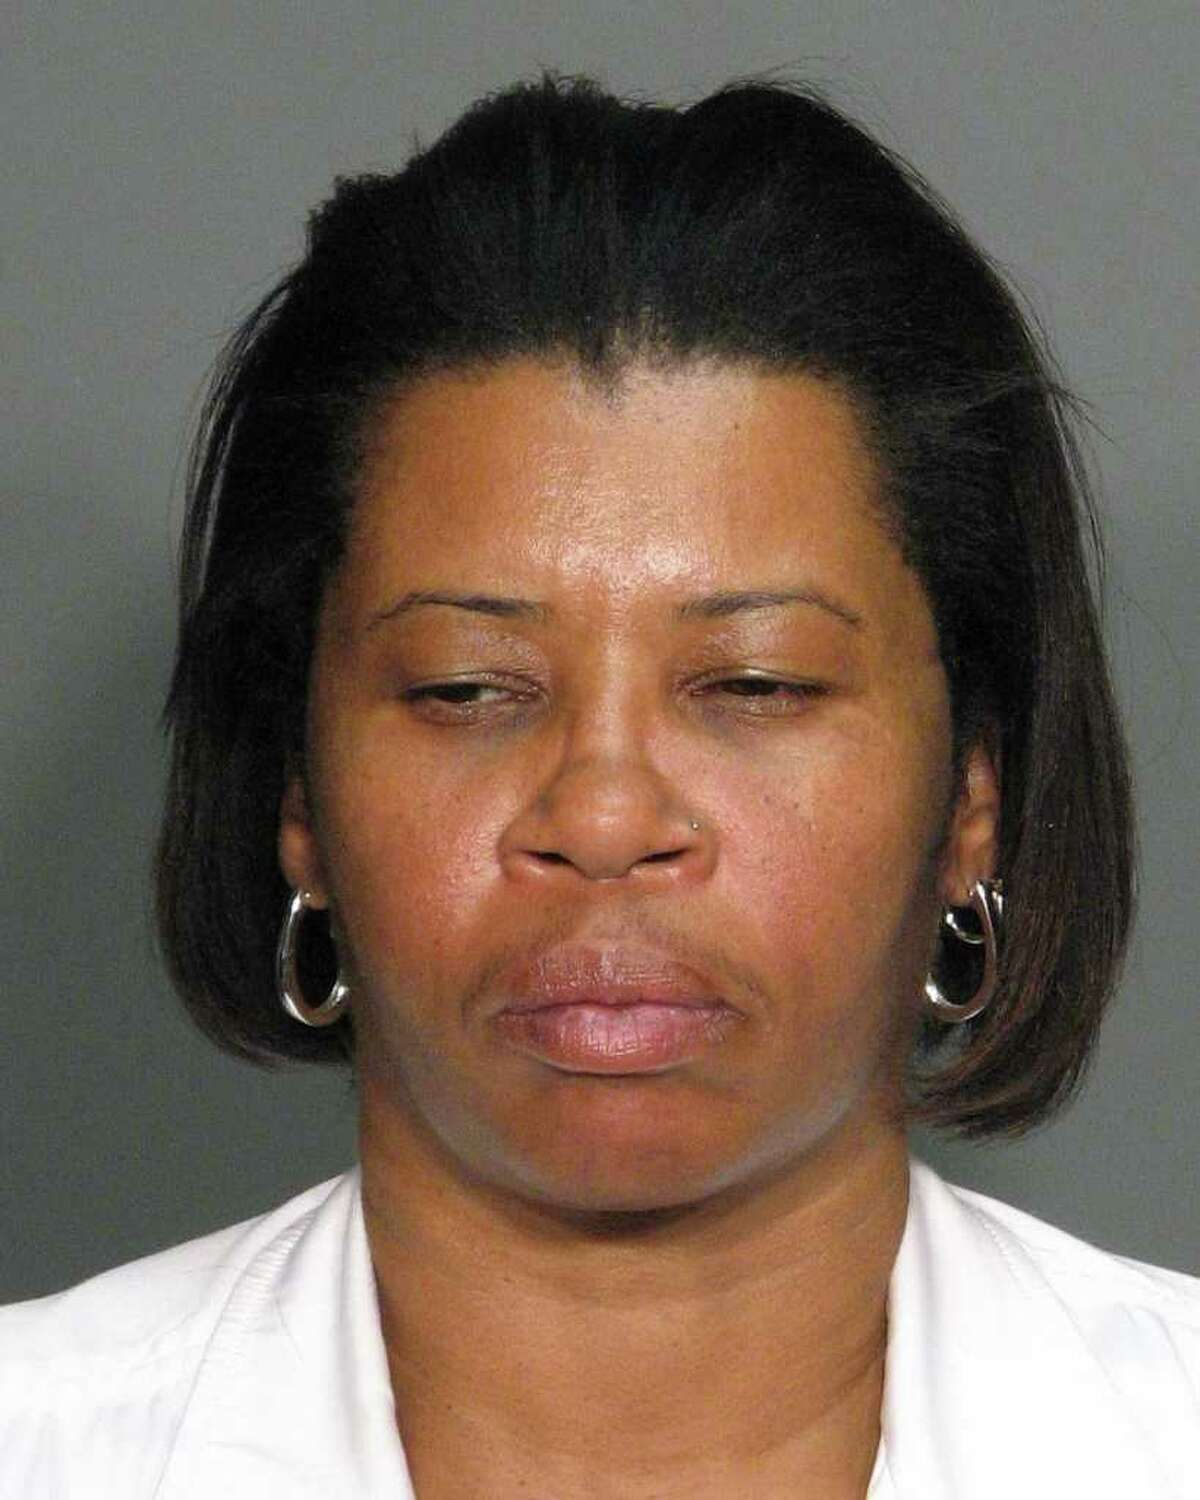 FILE - In this May 24, 2010 file photo provided by the Wake County (N.C.) Bureau of Identification, Ann Pettway is shown. Pettway, who raised a child kidnapped from a New York hospital two decades ago, surrendered to authorities on a parole violation charge Sunday, Jan. 23, 2011, days after a widely publicized reunion between the biological mother and the daughter taken from her as a baby. (AP Photo/Wake County Bureau of Identification, File)